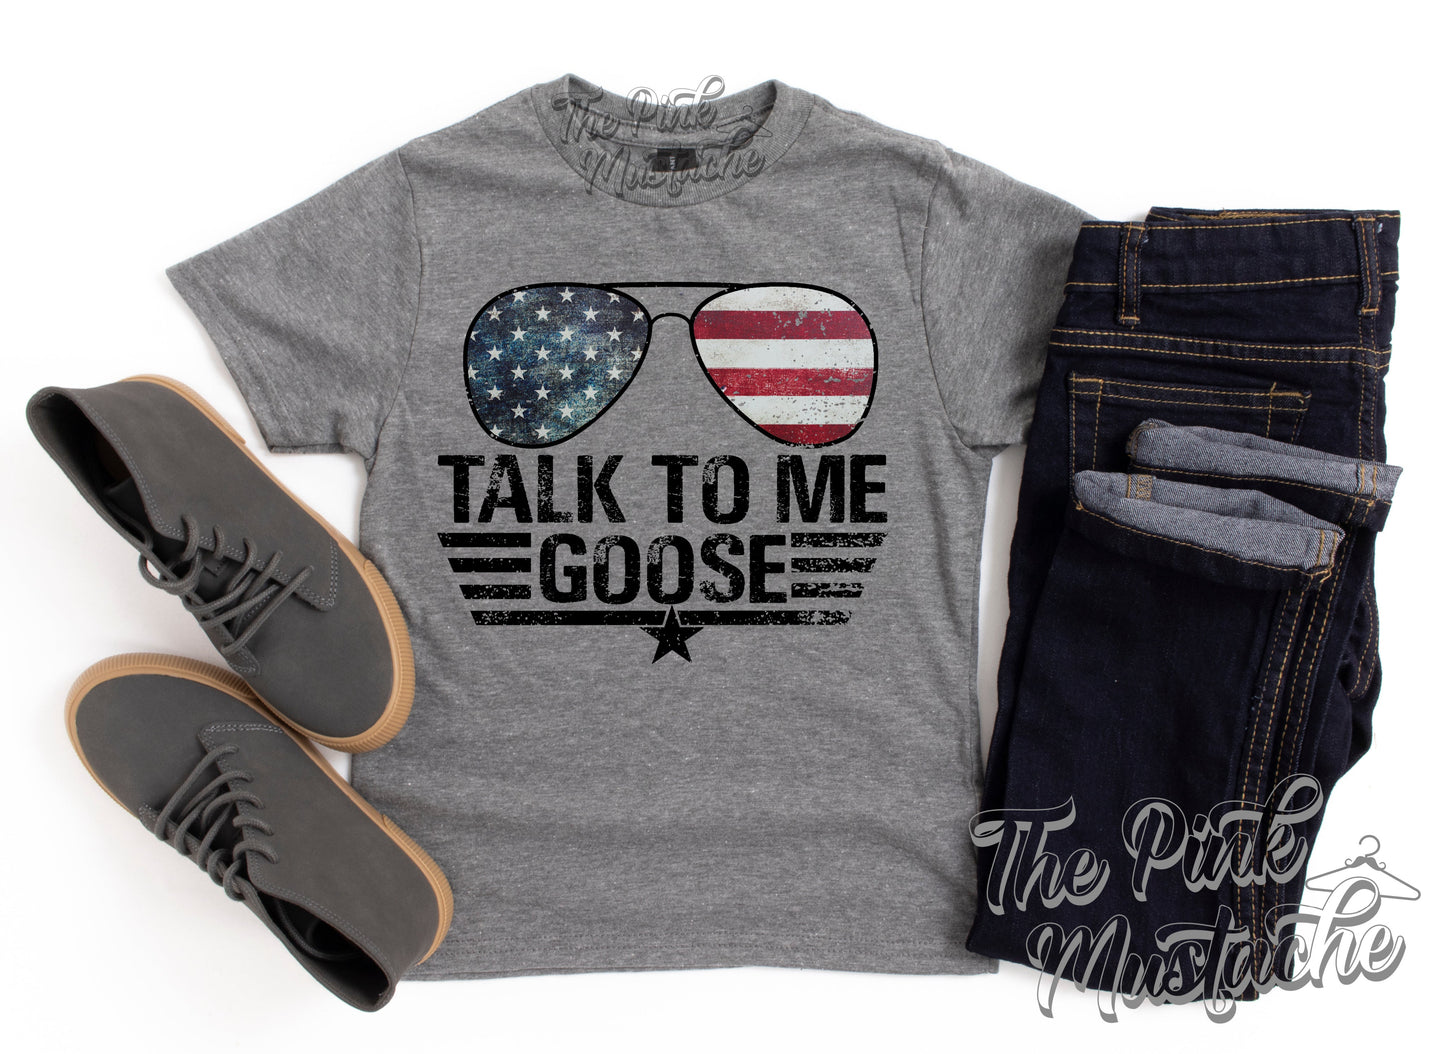 Mens Unisex Talk To Me Goose T-Shirt Aviators - July 4th - Red White and Blue / Top Gun Inspired Tee / Maverick Goose / Aviators Tee - Top Gun 2 Inspired